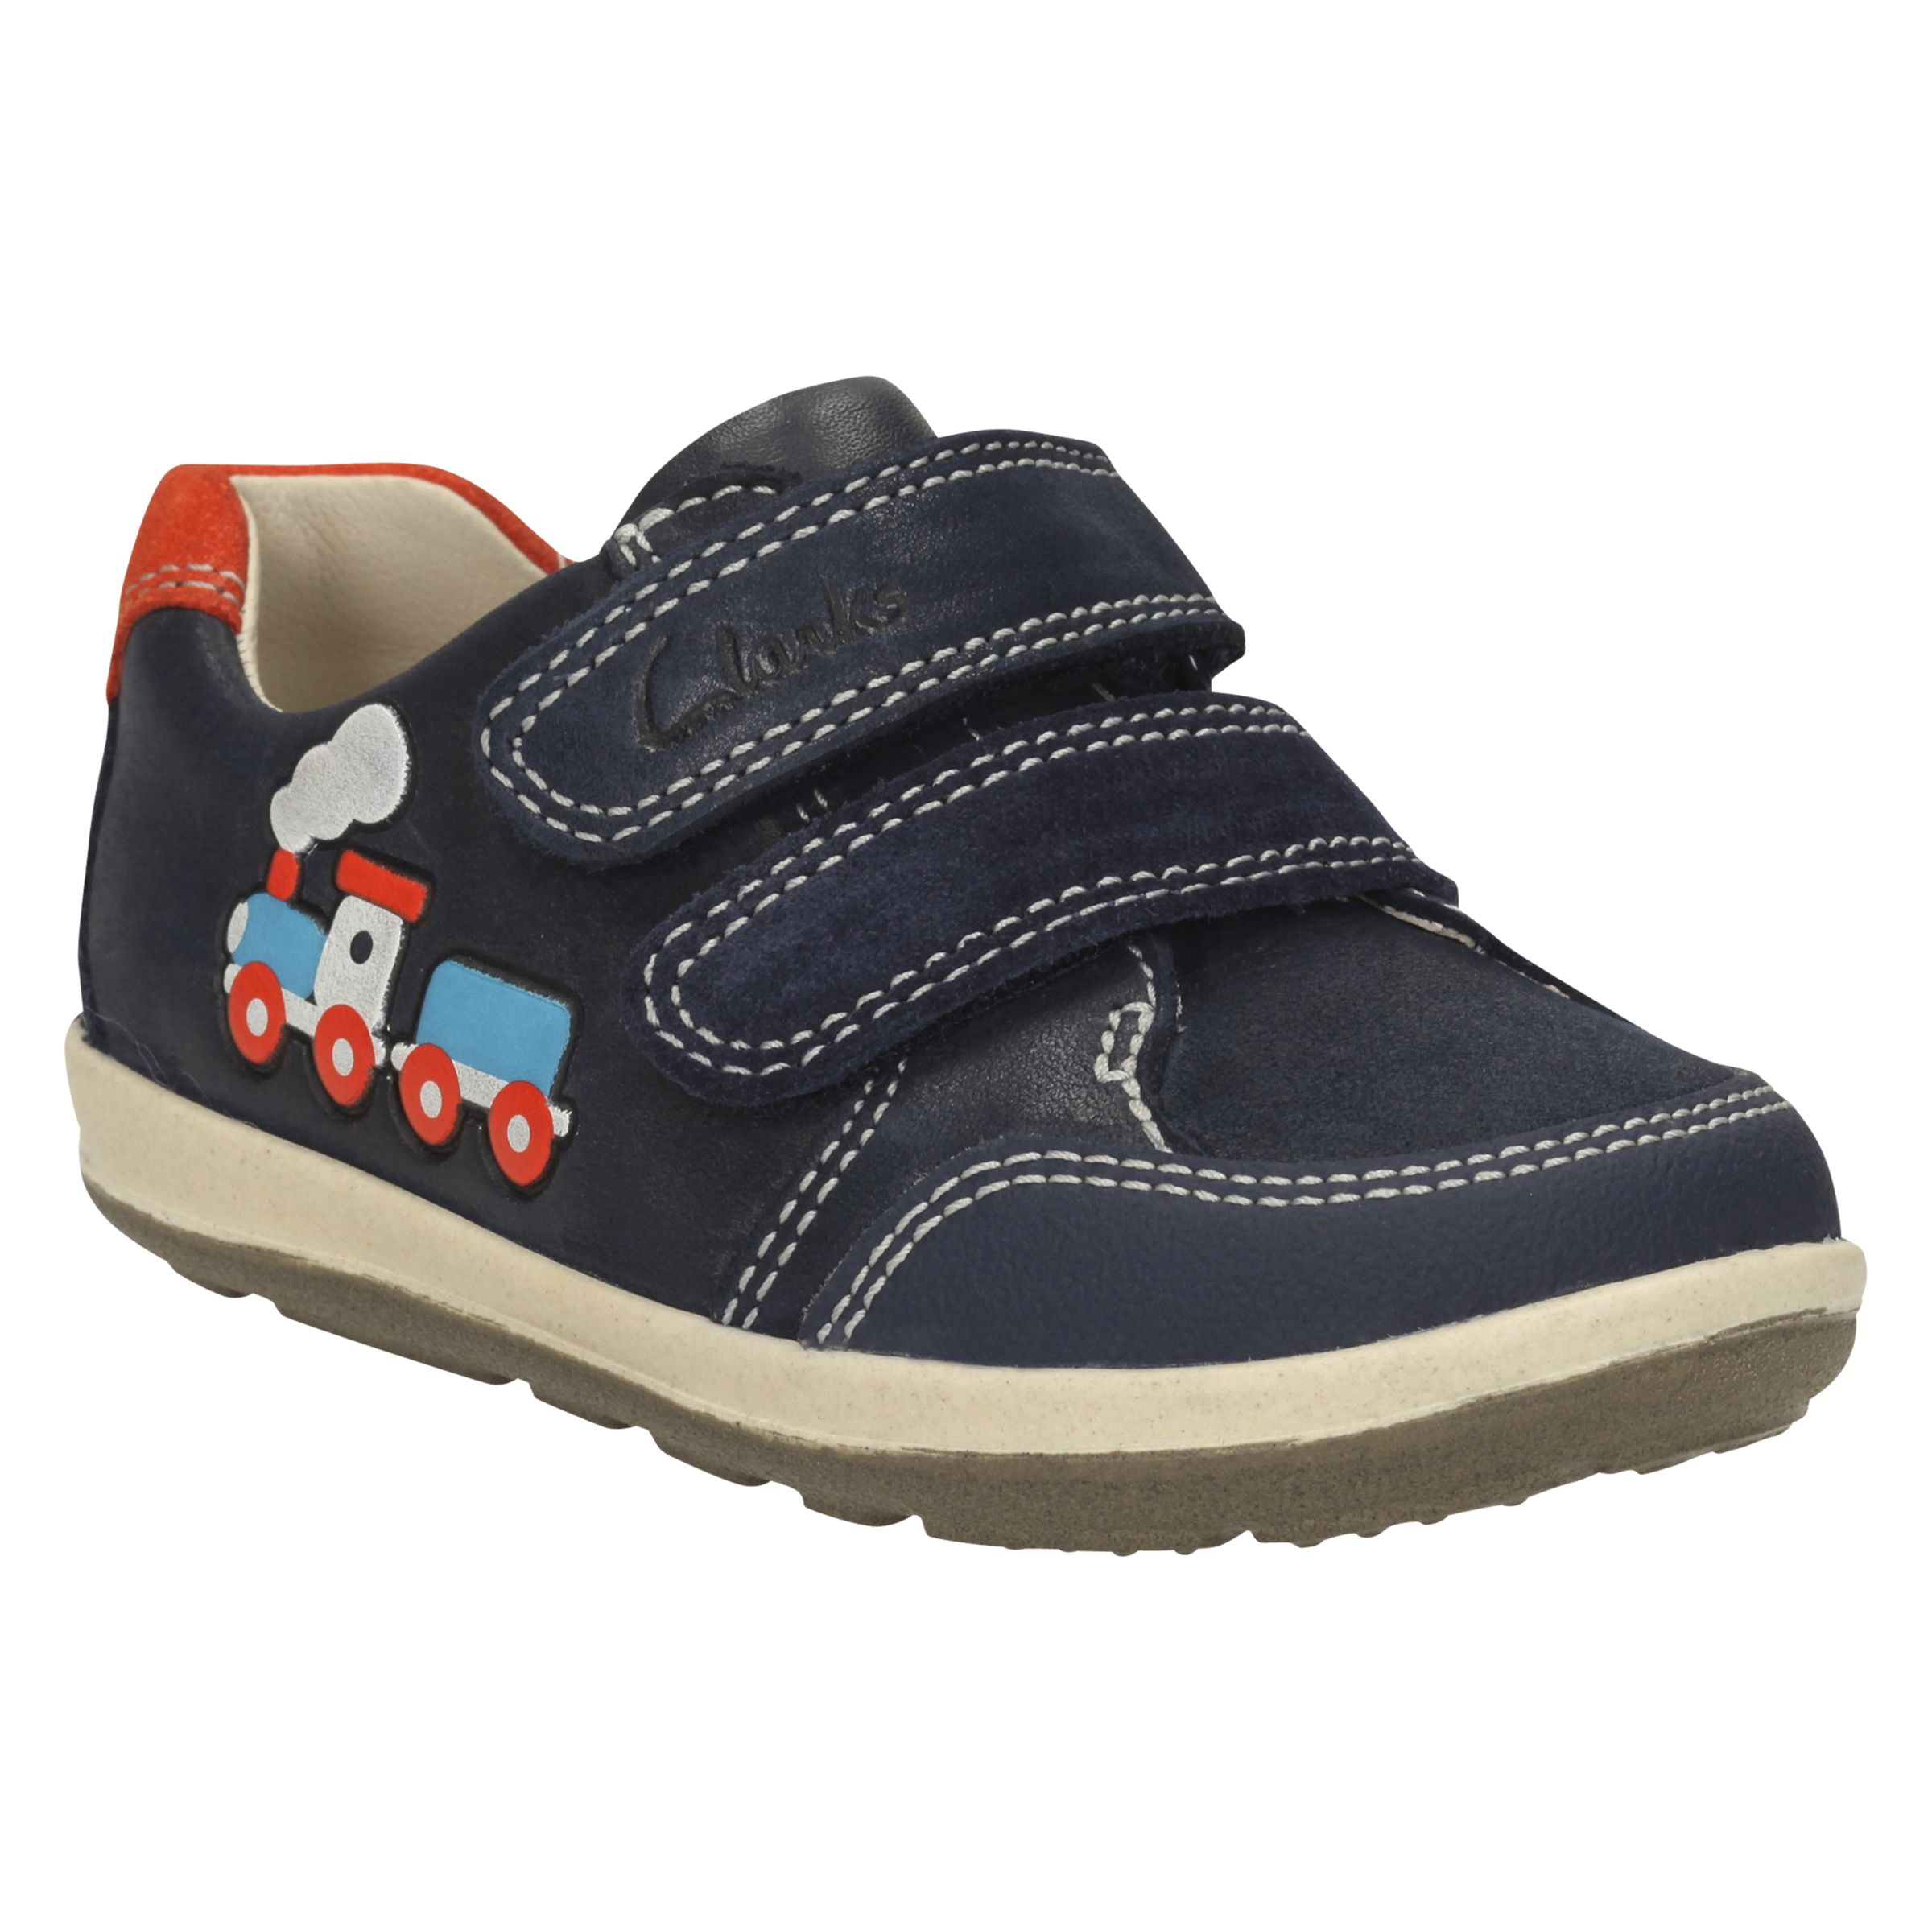 Clarks Children's Softly Tom Leather Shoes, Navy